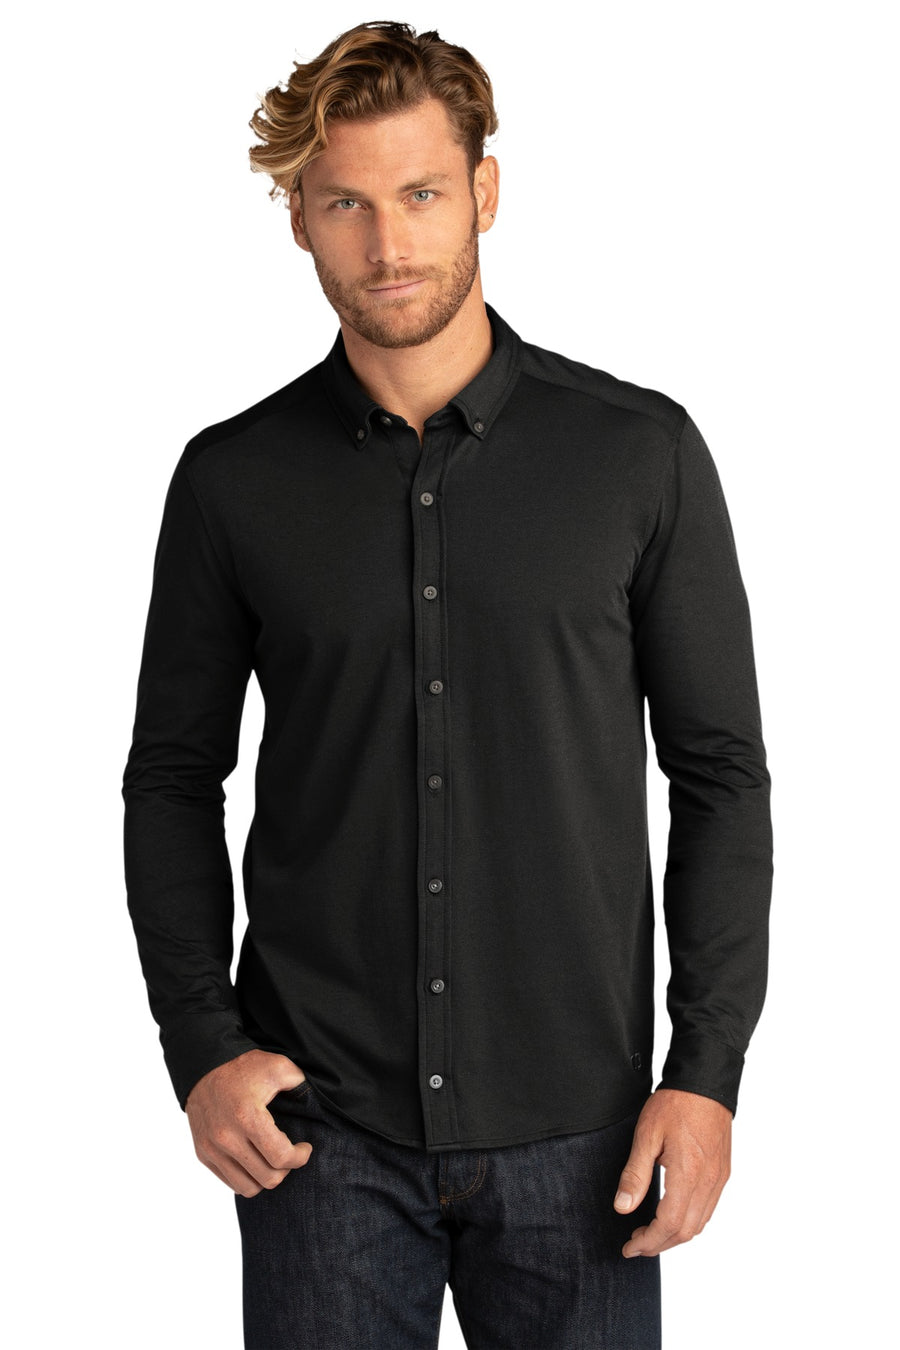 OGIO Code Stretch Long Sleeve Button-Up.